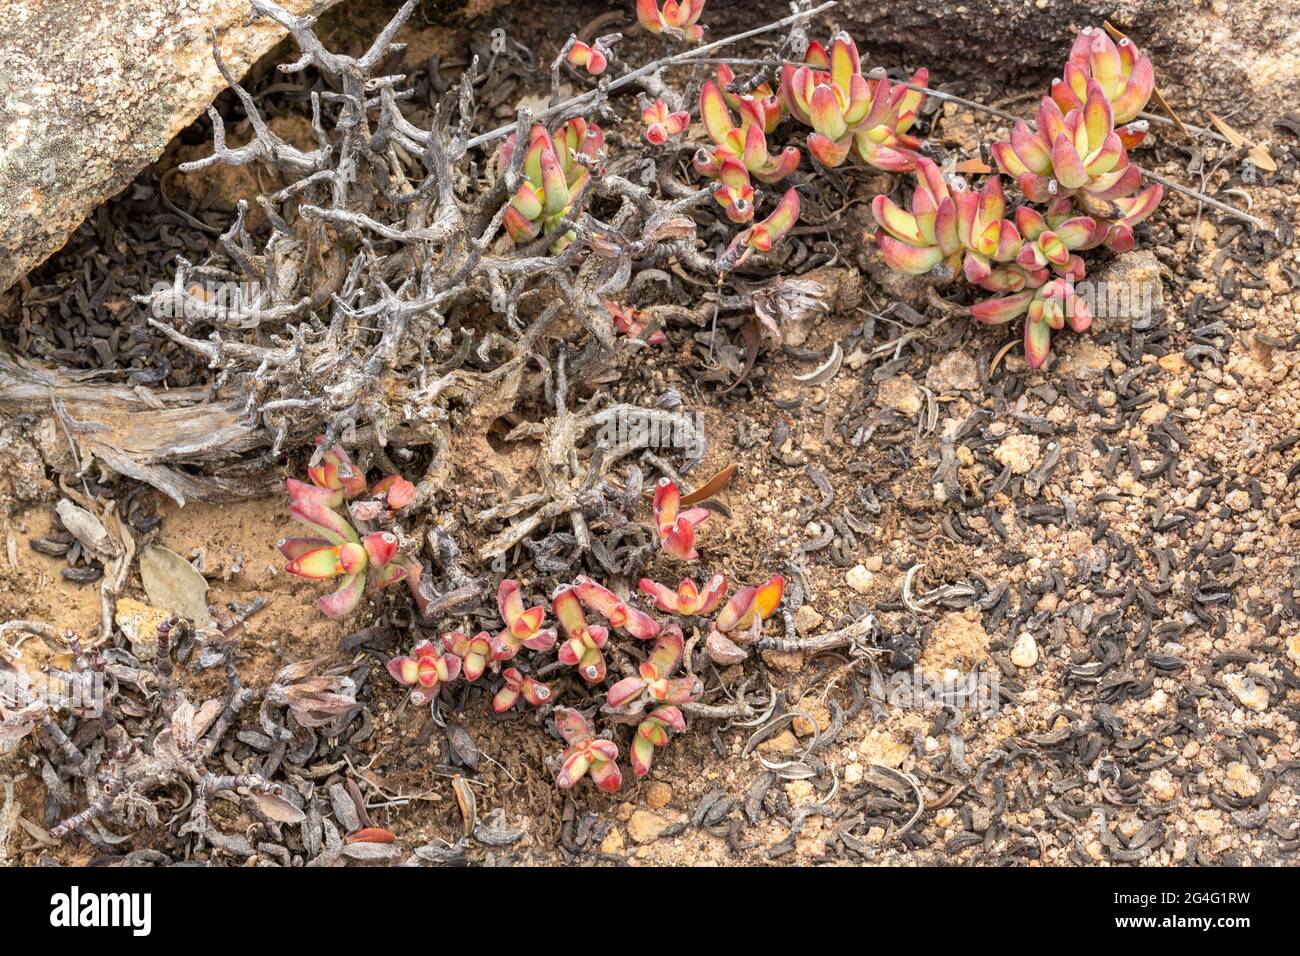 Crassula brevifolia in natural habitat close to Van Rhynsdorp in the Western Cape of South Africa Stock Photo